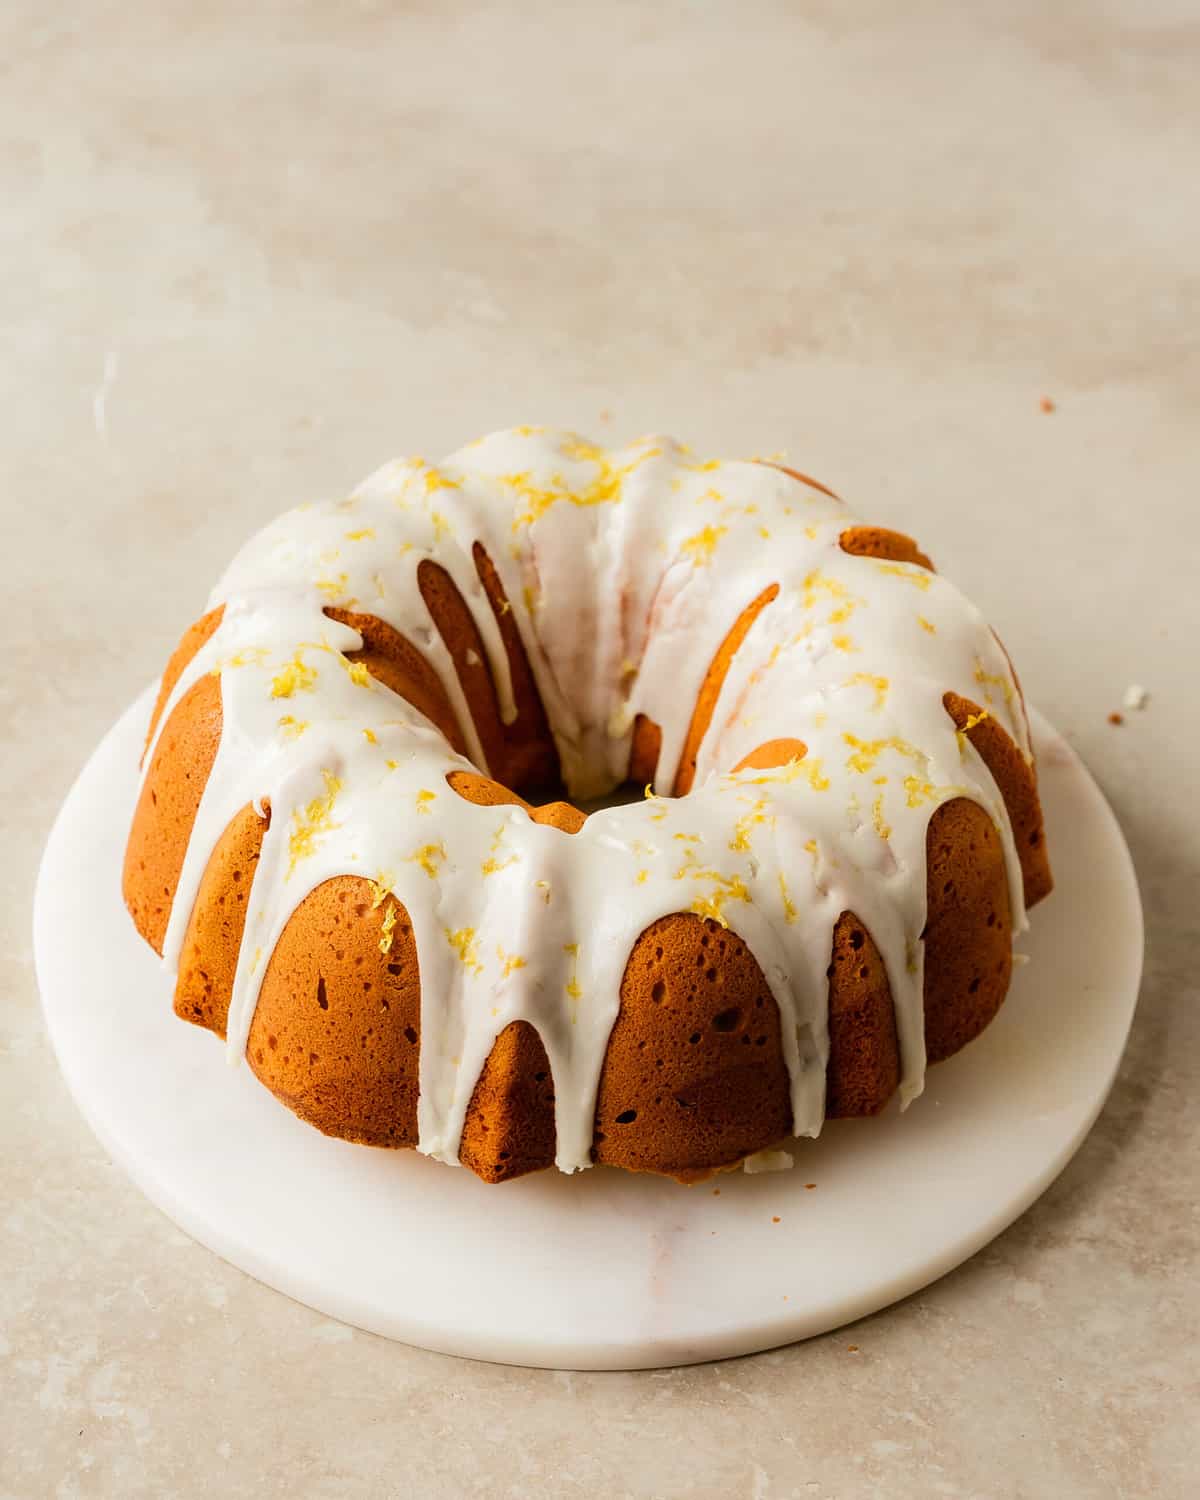 Lemon cream cheese pound cake is a decadent, dense and buttery lemon pound cake made with cream cheese. Top this lemon cake with a sweet and tart lemon glaze for even more lemon flavor. Enjoy this easy to make, old fashioned lemon pound cake for breakfast, brunch or dessert. 